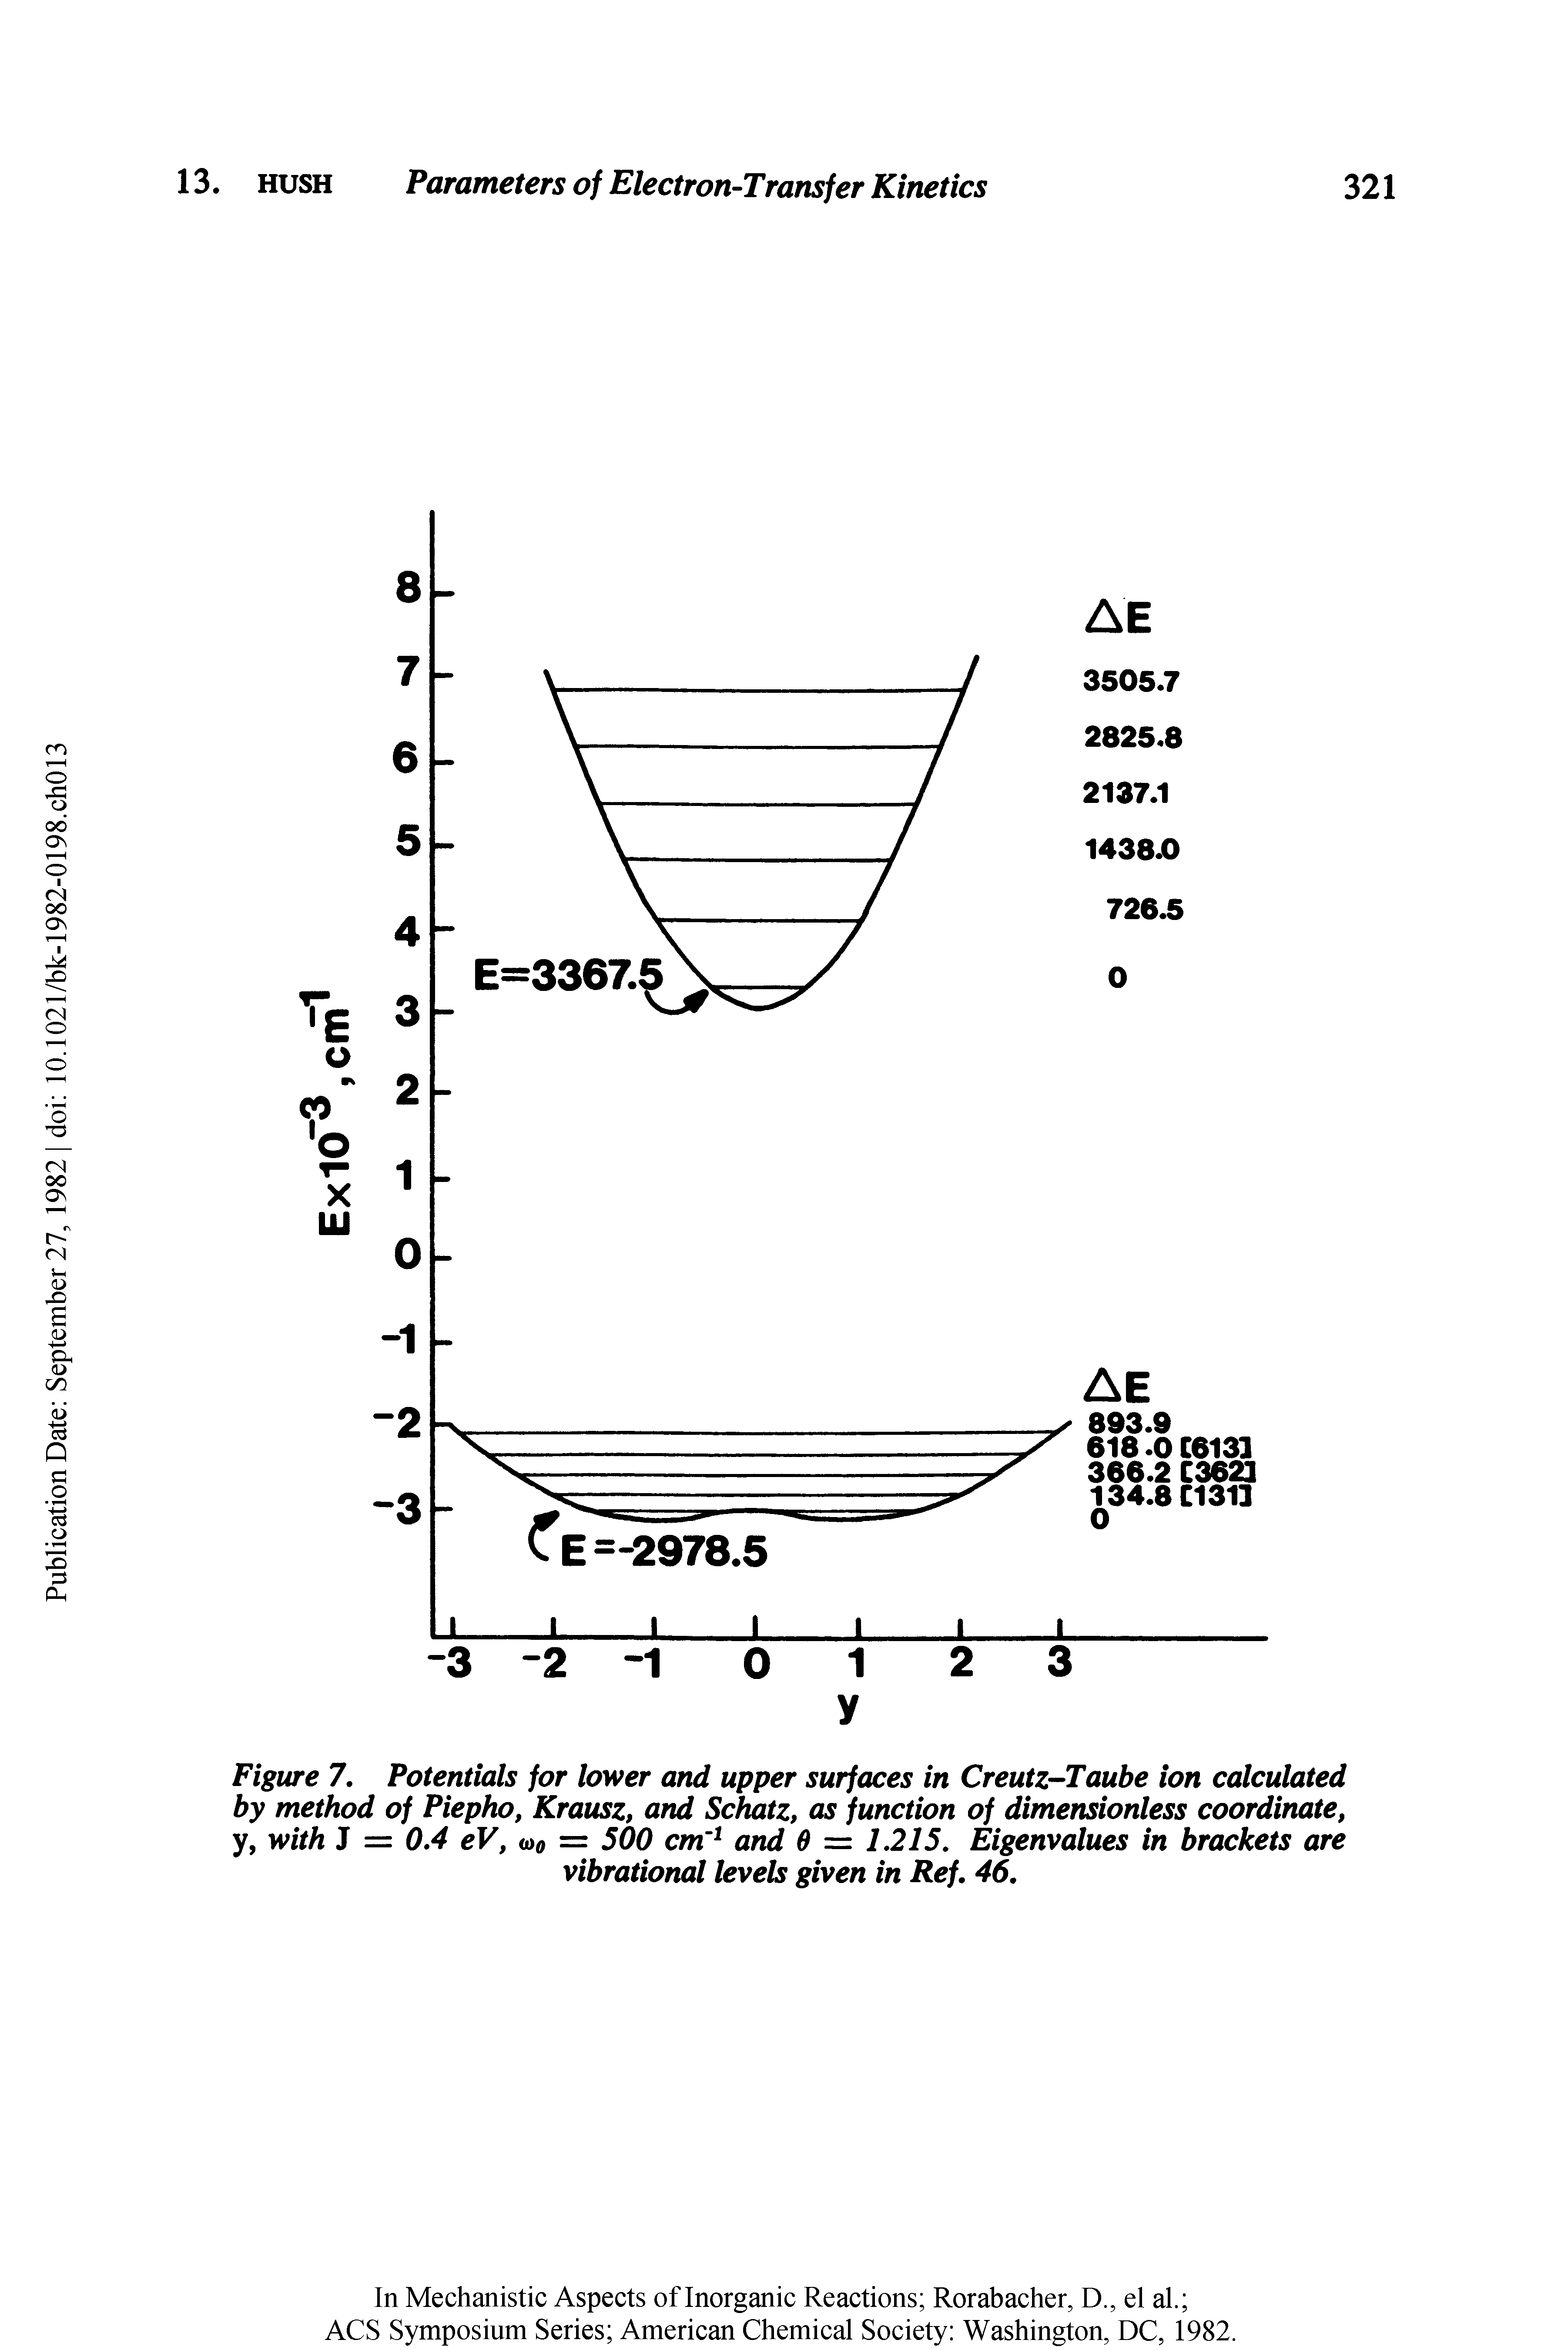 Figure 7. Potentials for lower and upper surfaces in Creutz-Taube ion calculated by method of Piepho, Krausz, and Schatz, as function of dimensionless coordinate, y, with J = 0.4 eV, <o0 = 500 cm 1 and 0 = 1.215. Eigenvalues in brackets are vibrational levels given in Ref. 46.